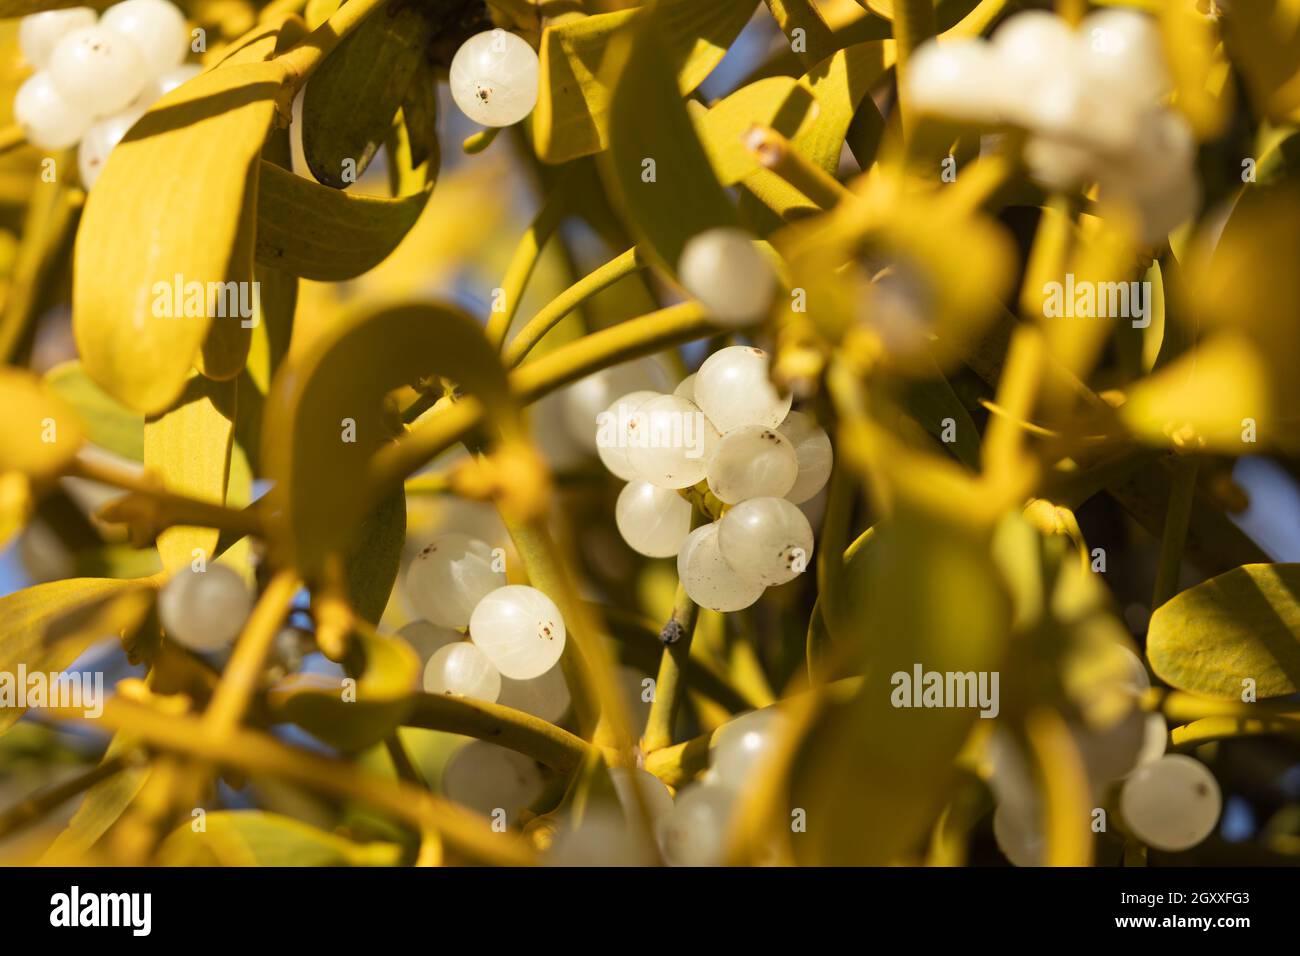 Mistletoe, or Viscum album, of the family Santalaceae, growing on the branches of an almond tree, near the Moncayo natural park, Aragon, Spain Stock Photo